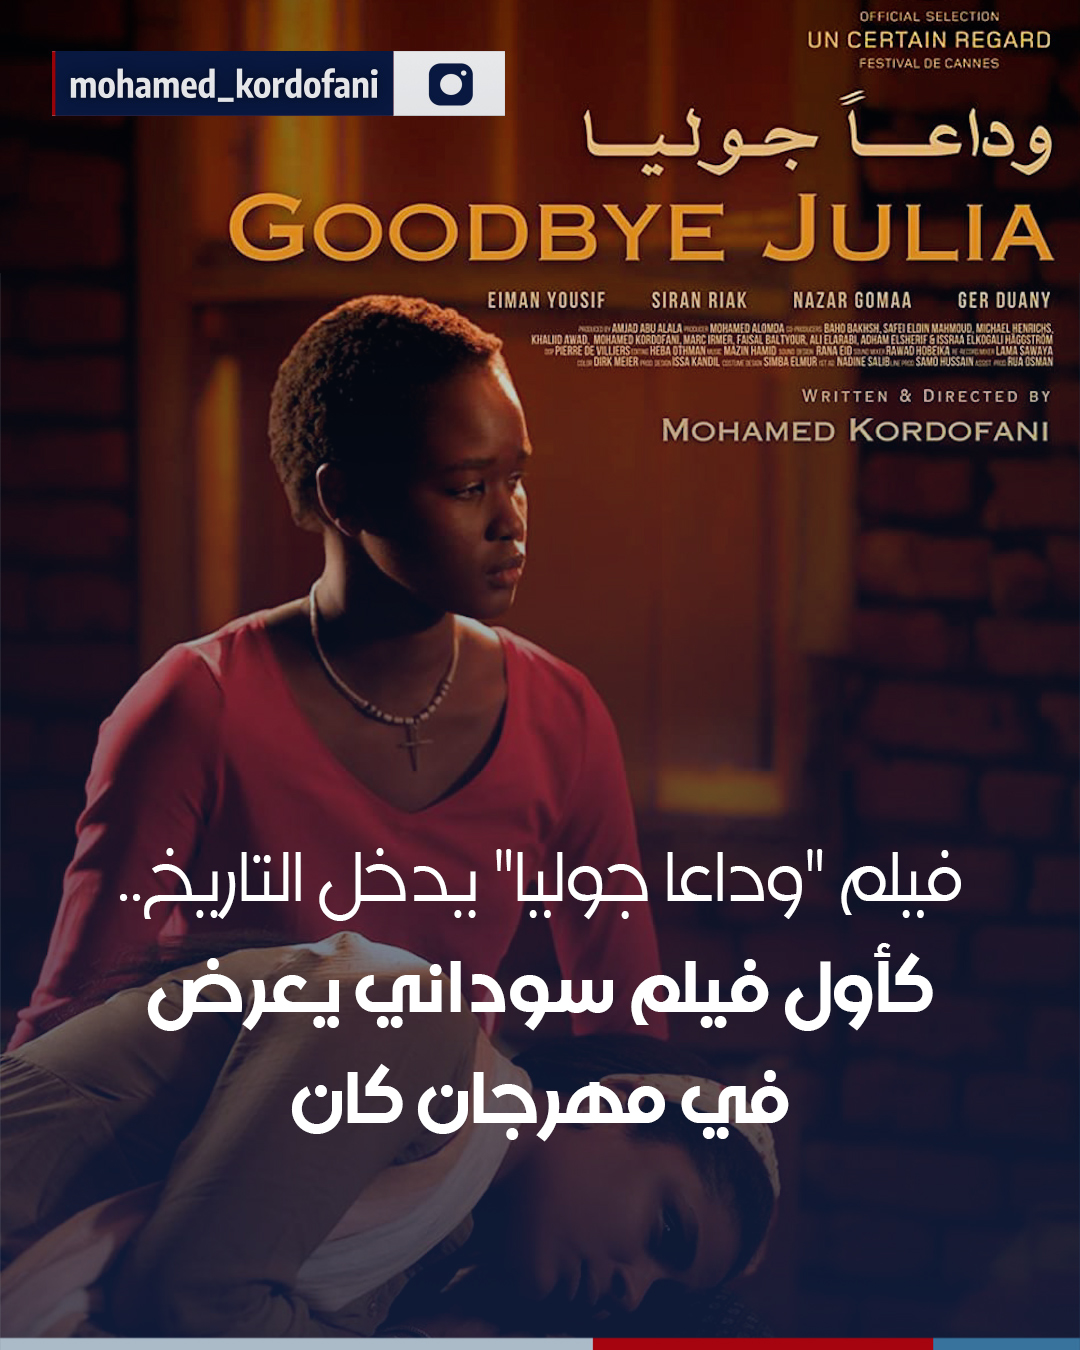 The film Goodbye, Julia made history as the first Sudanese film to reach international recognition